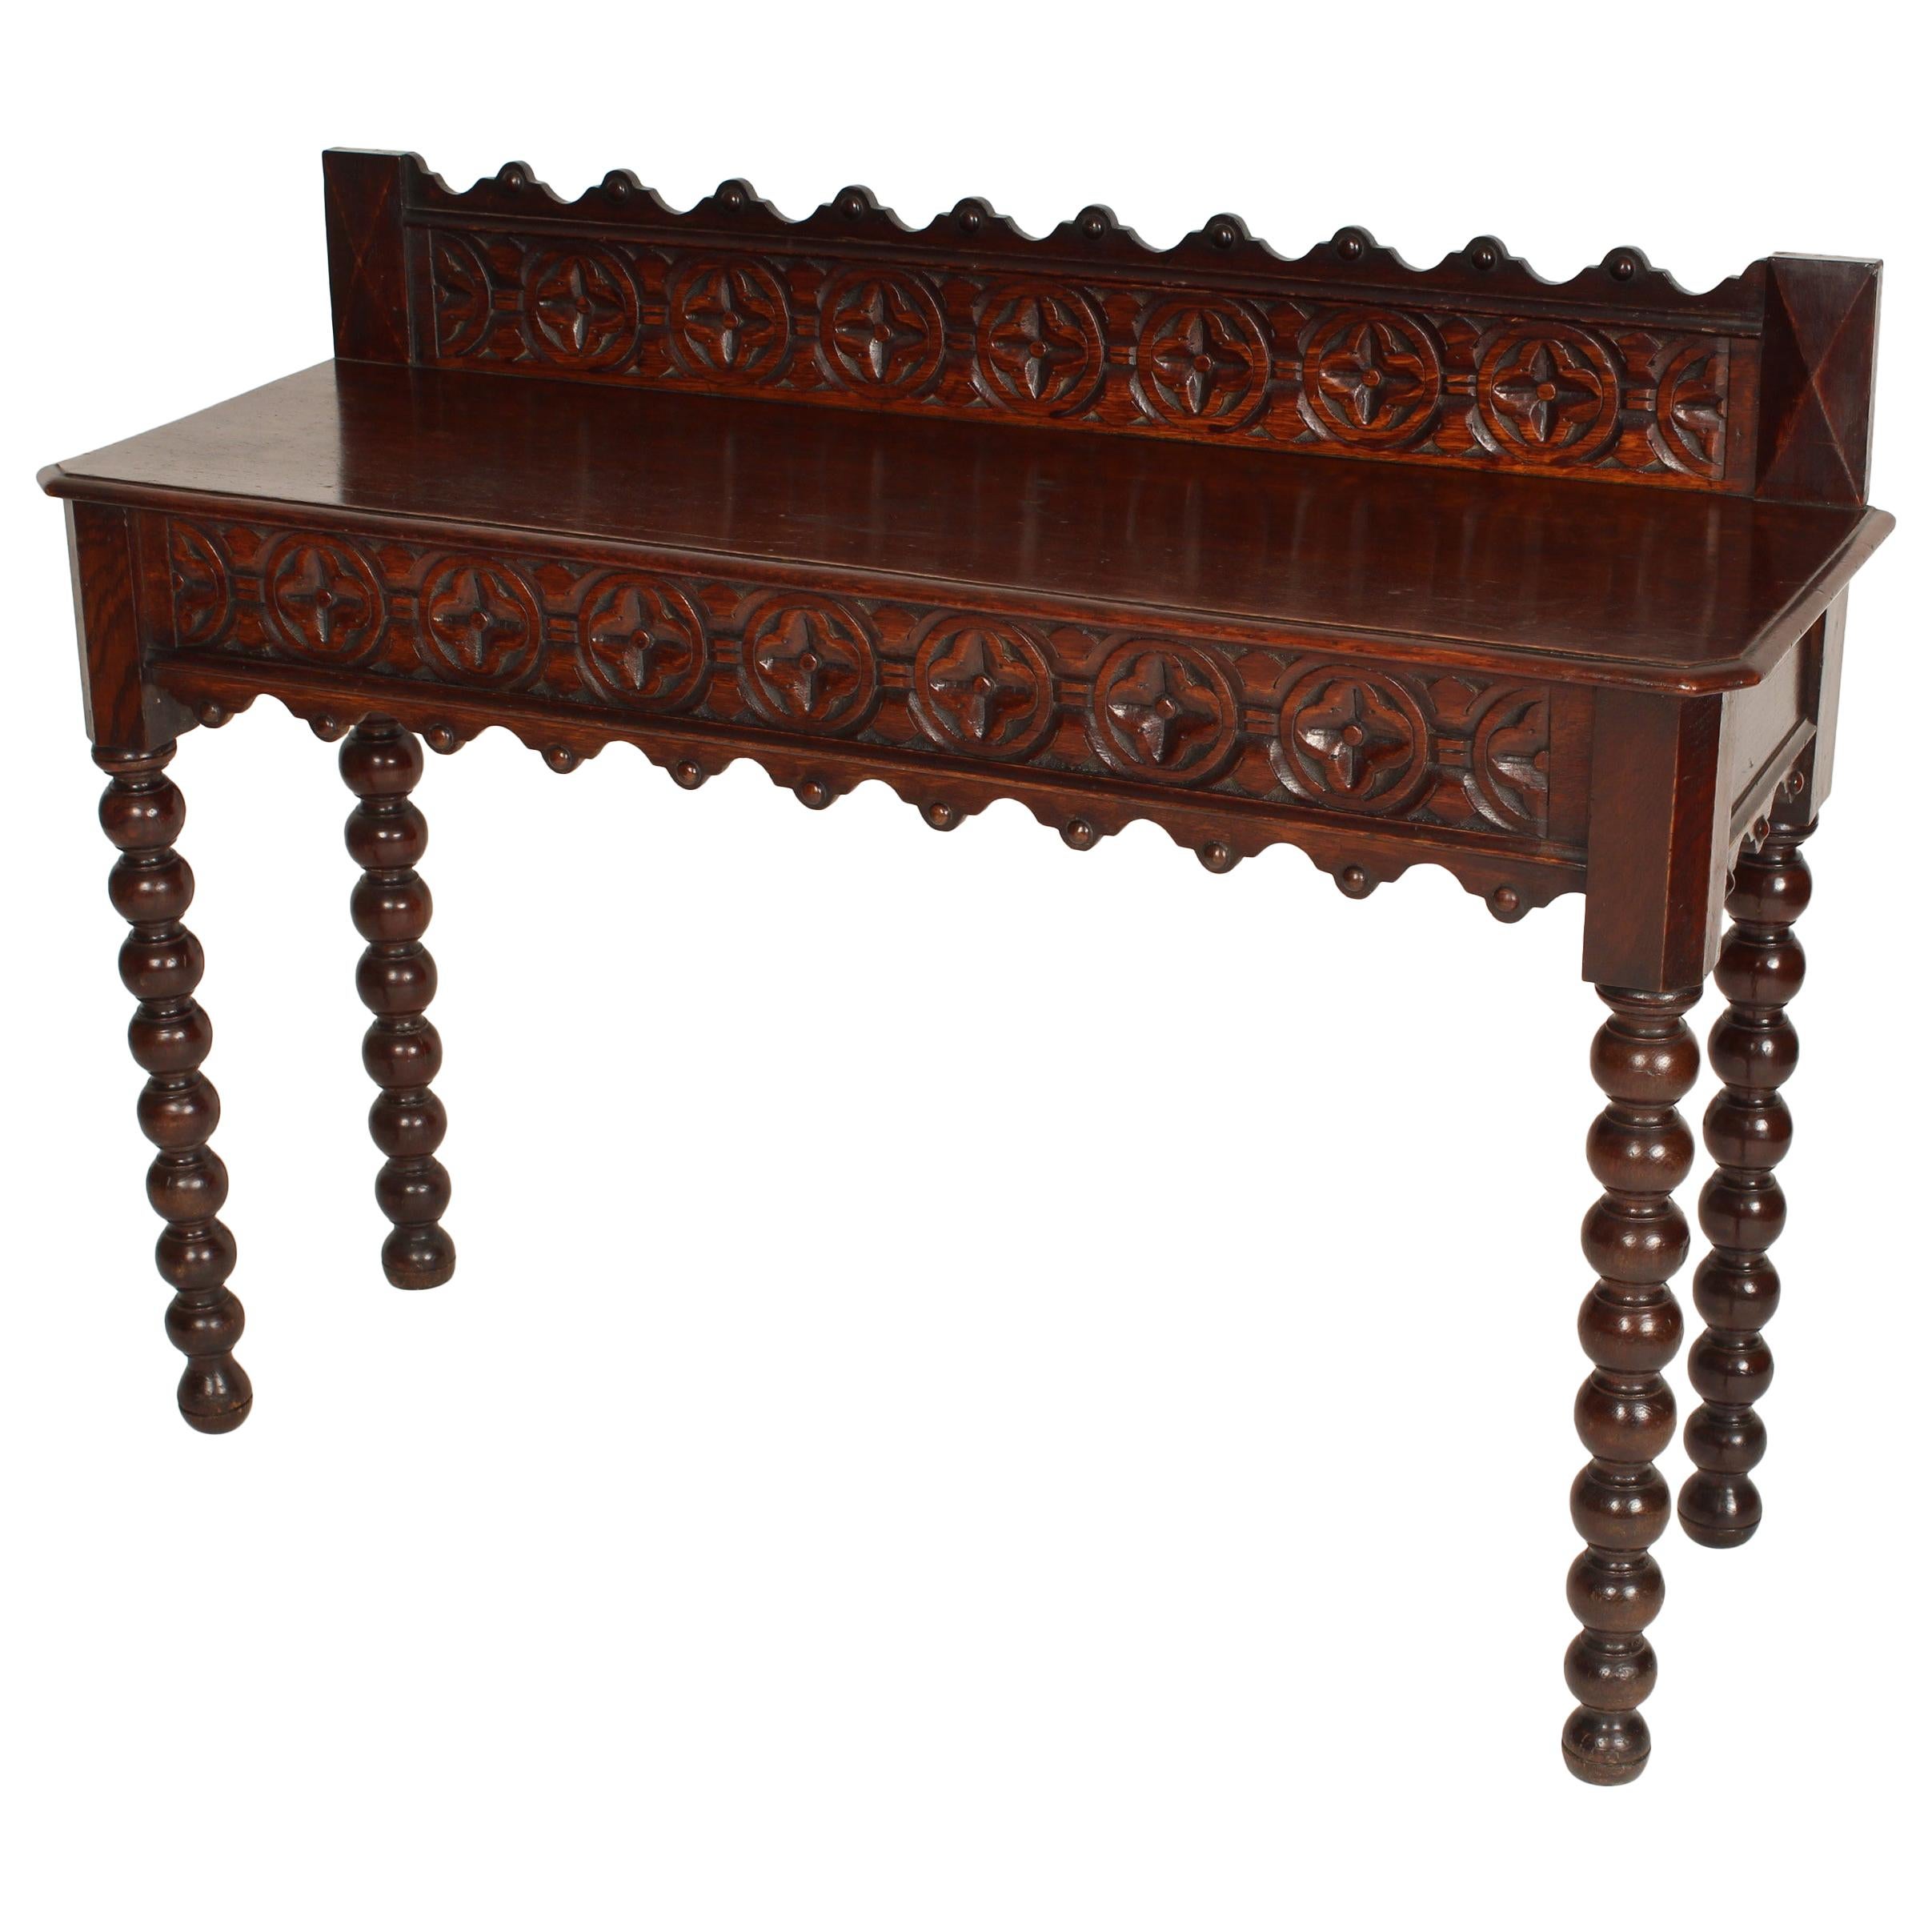 Gothic Revival Console Table